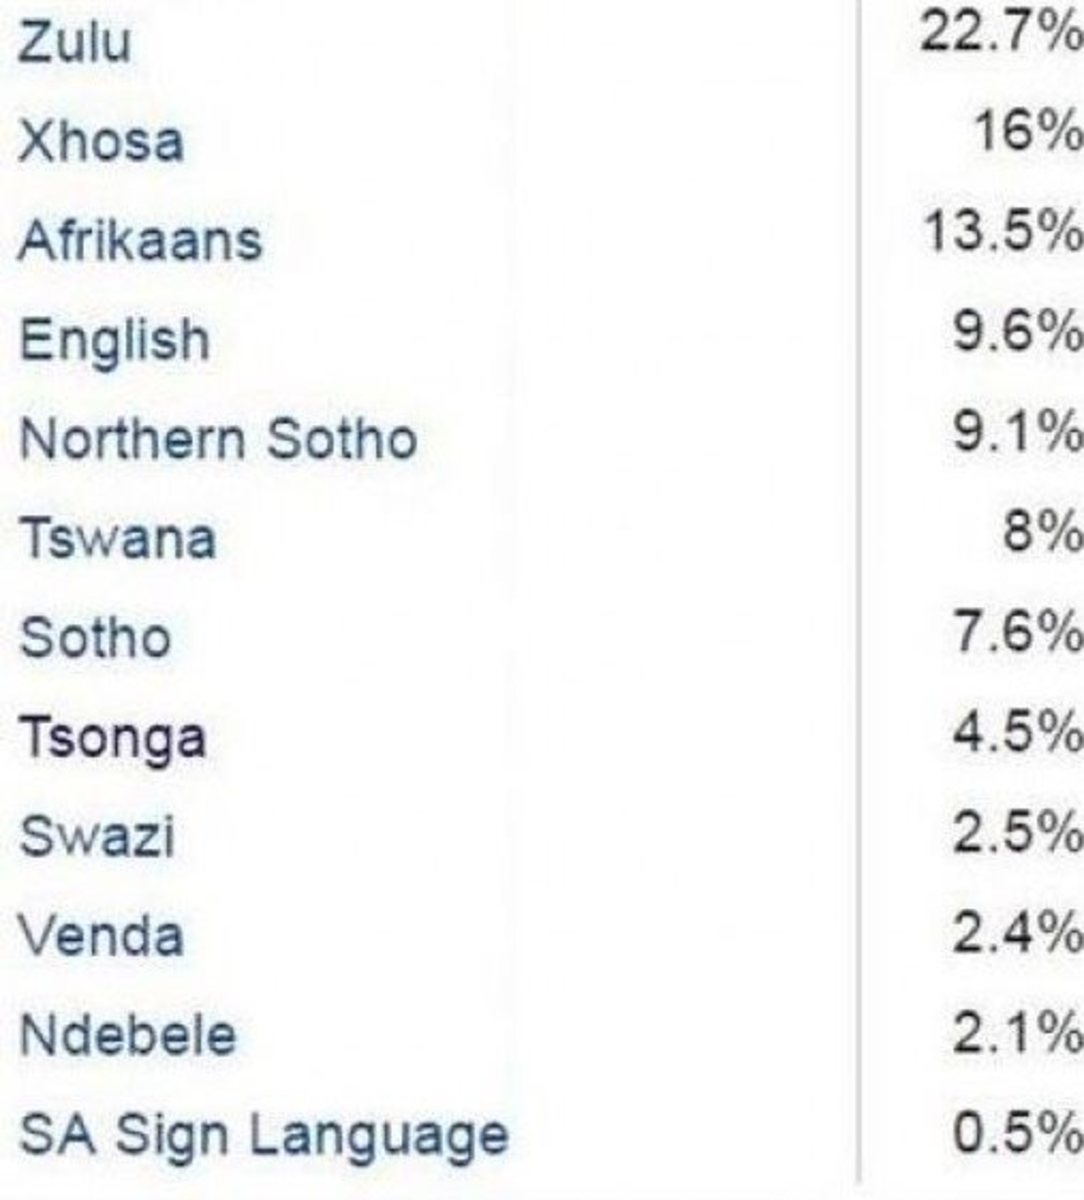 South Africa's eleven official languages 